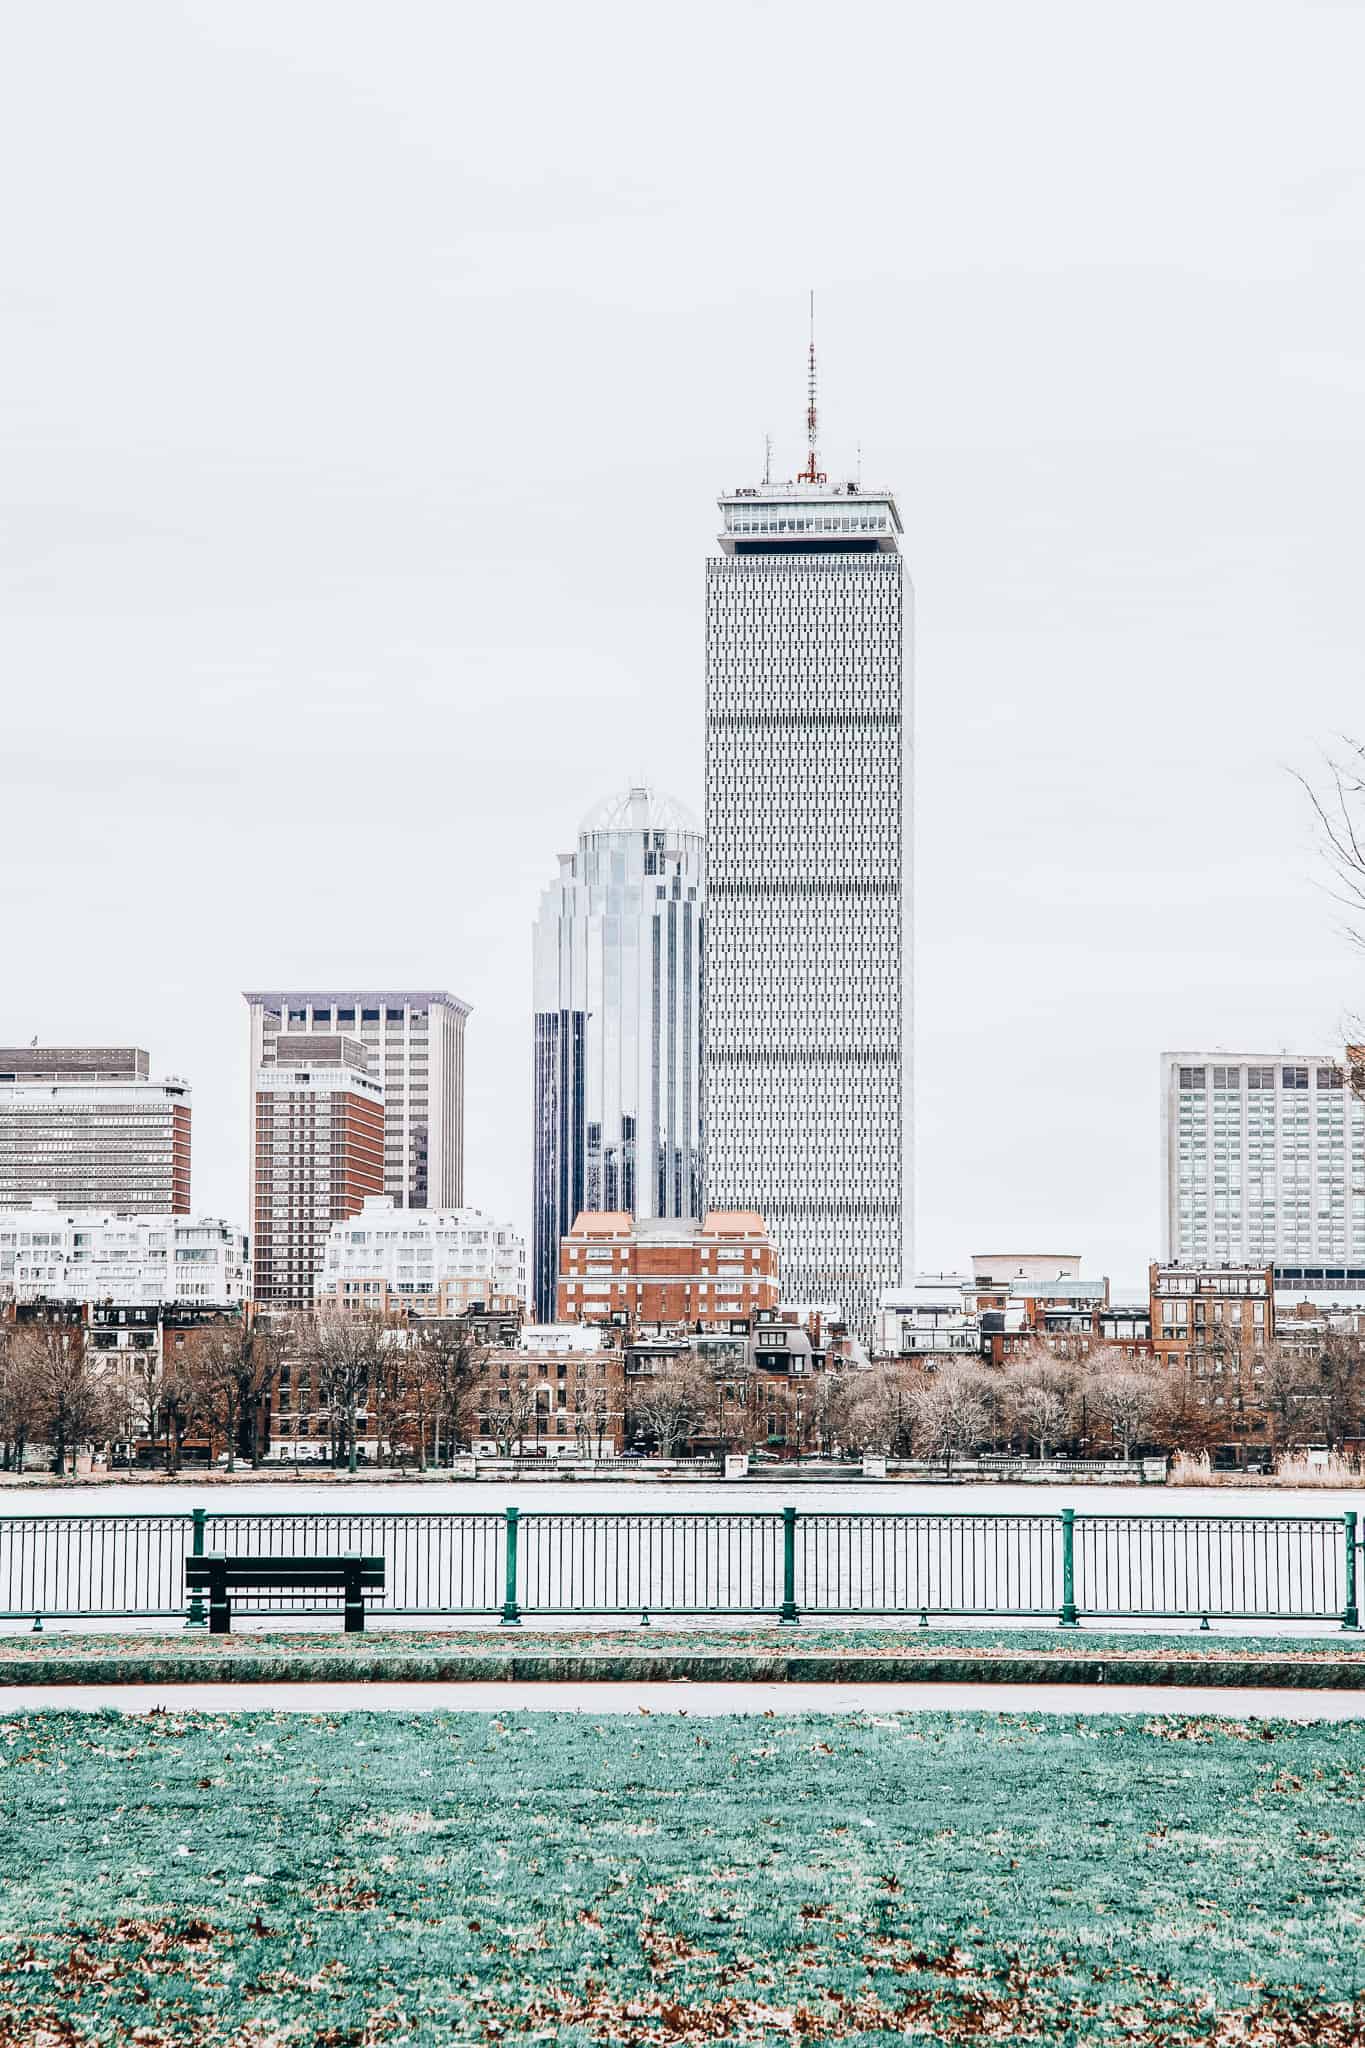 Charles River Esplanade - Walk along Boston's most beautiful River with spectacular view of the Prudential building.